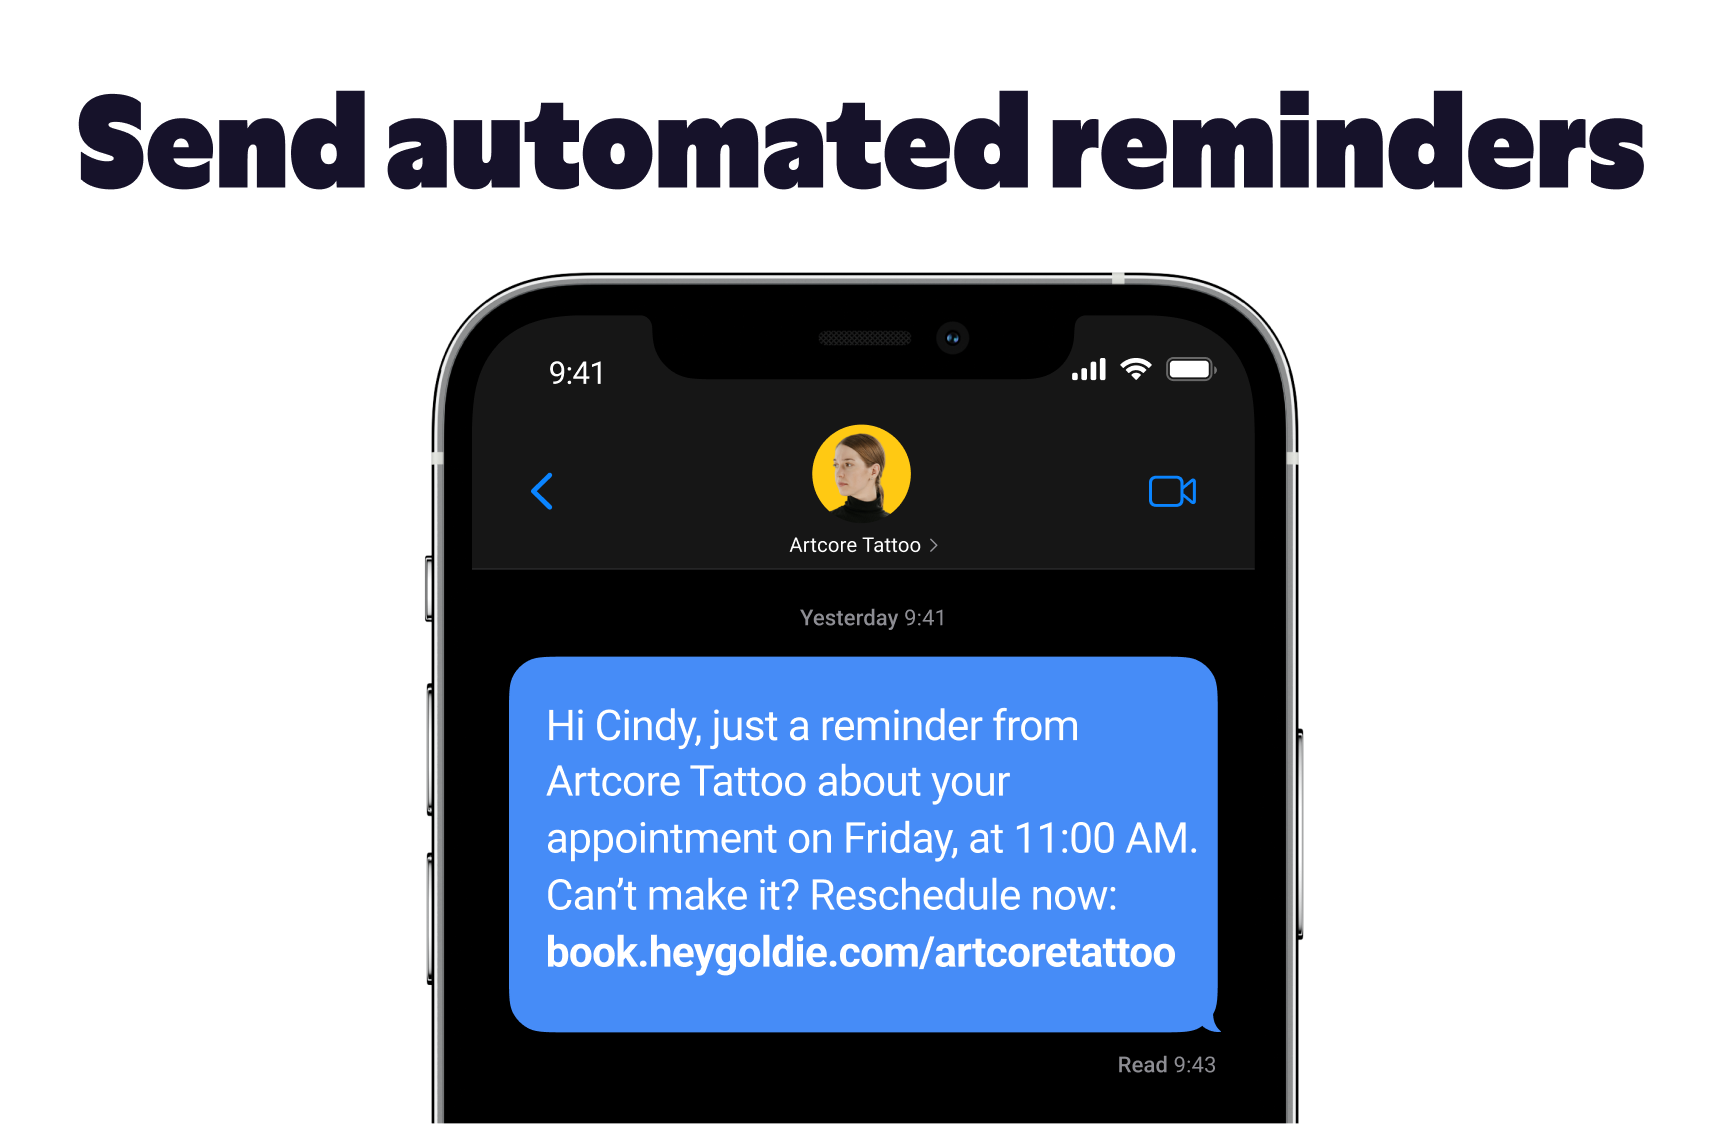 Goldie Software - Appointment reminder messages. Reduce no-shows by keeping clients up to date with automated text reminders. Goldie sends automated appointment reminders and booking confirmations, so you don’t have to. Protect your time like a pro.